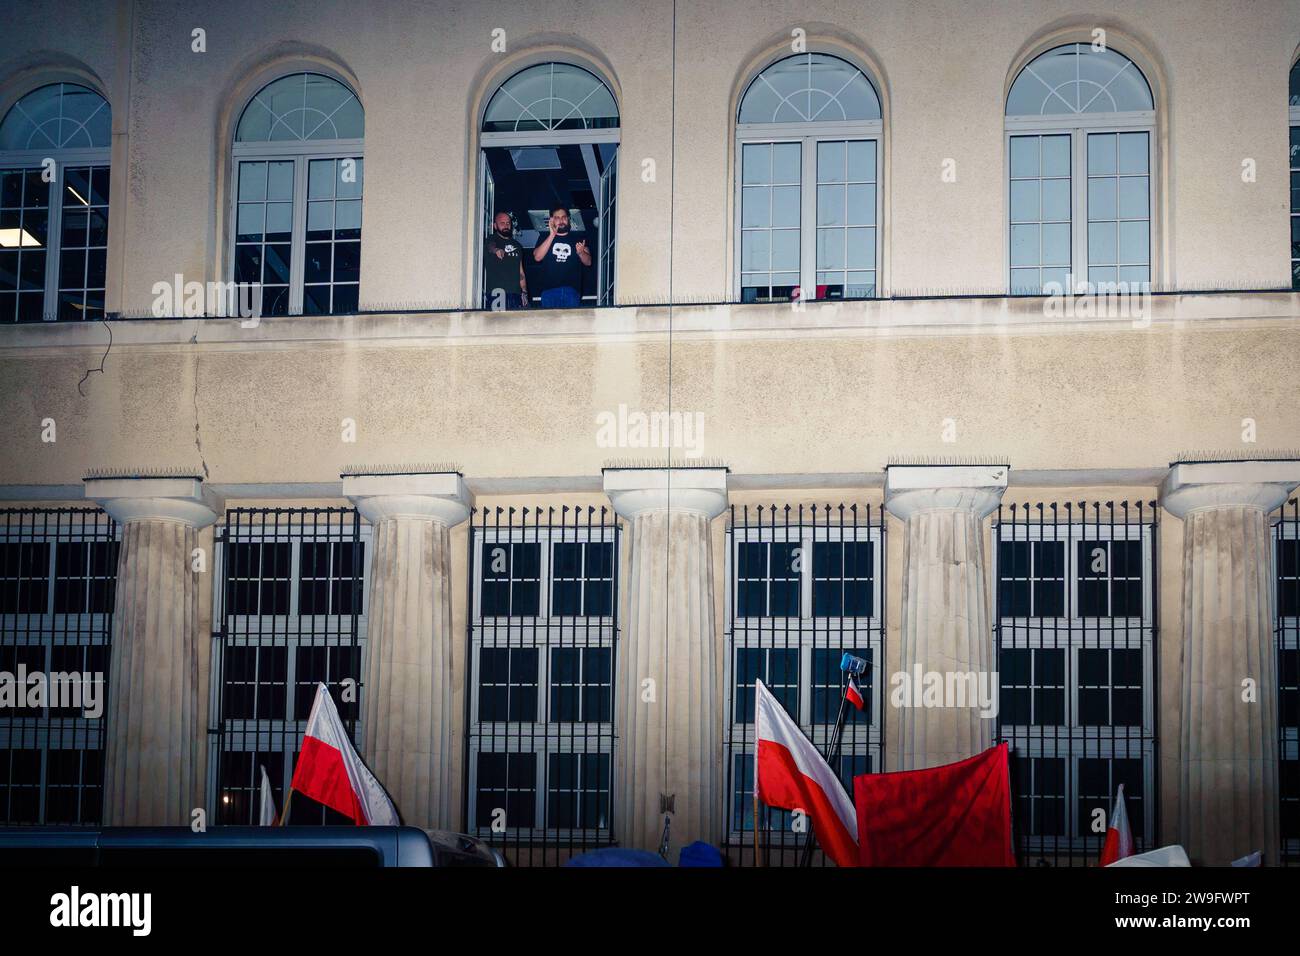 PiS propagandists in the window of occupied TVP INFO. After losing the elections, Law and Justice is postponing the return of the public media, which they used as a propaganda outlet. Warsaw Poland Copyright: xMikolajxJaneczekx Stock Photo